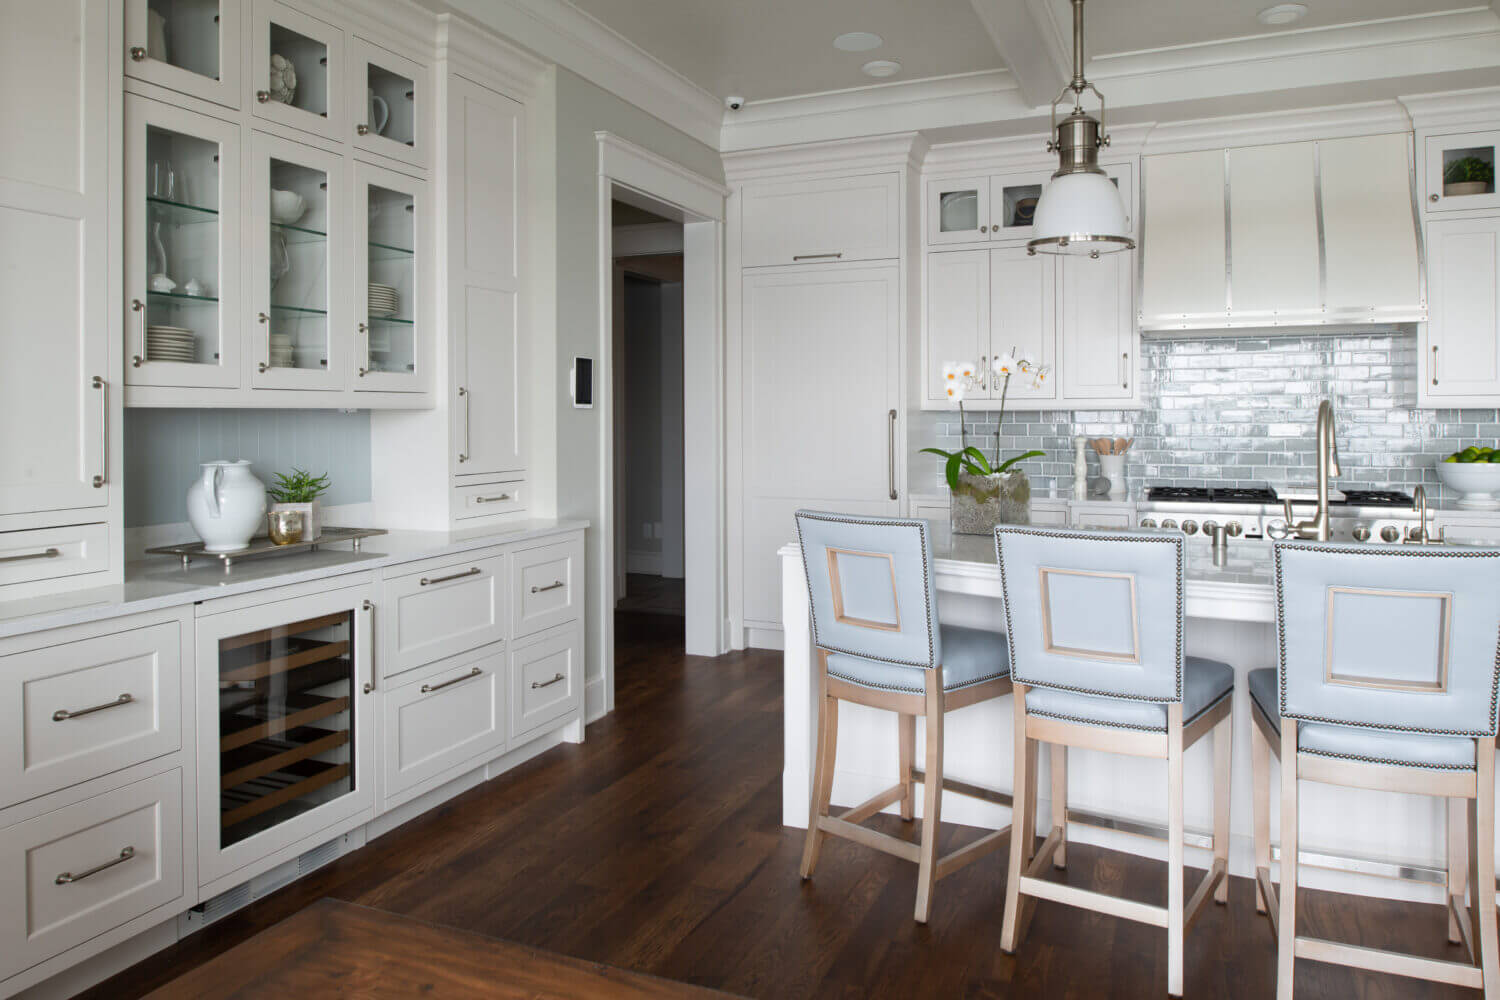 A coastal style kitchen with white painted cabinets with inset construction and shaker style doors.